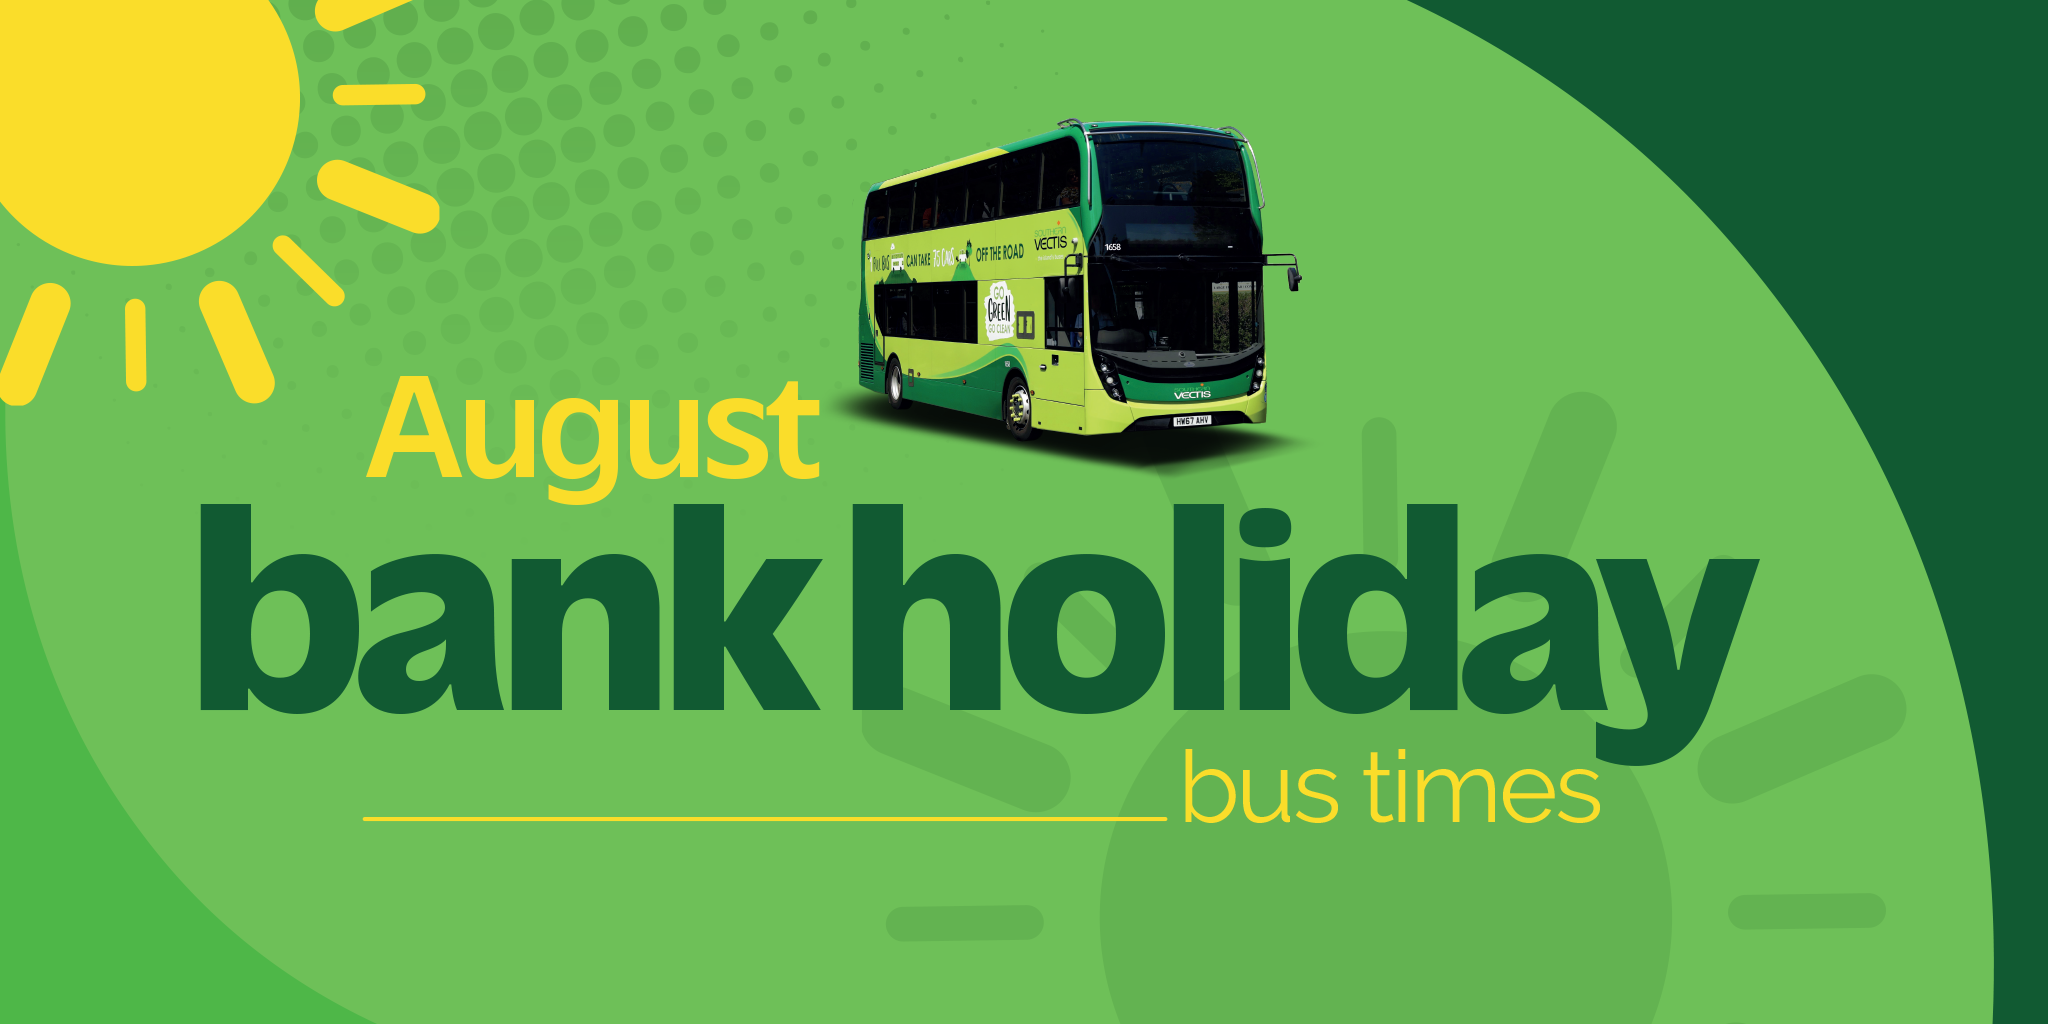 Bank Holiday bus times - 28 August